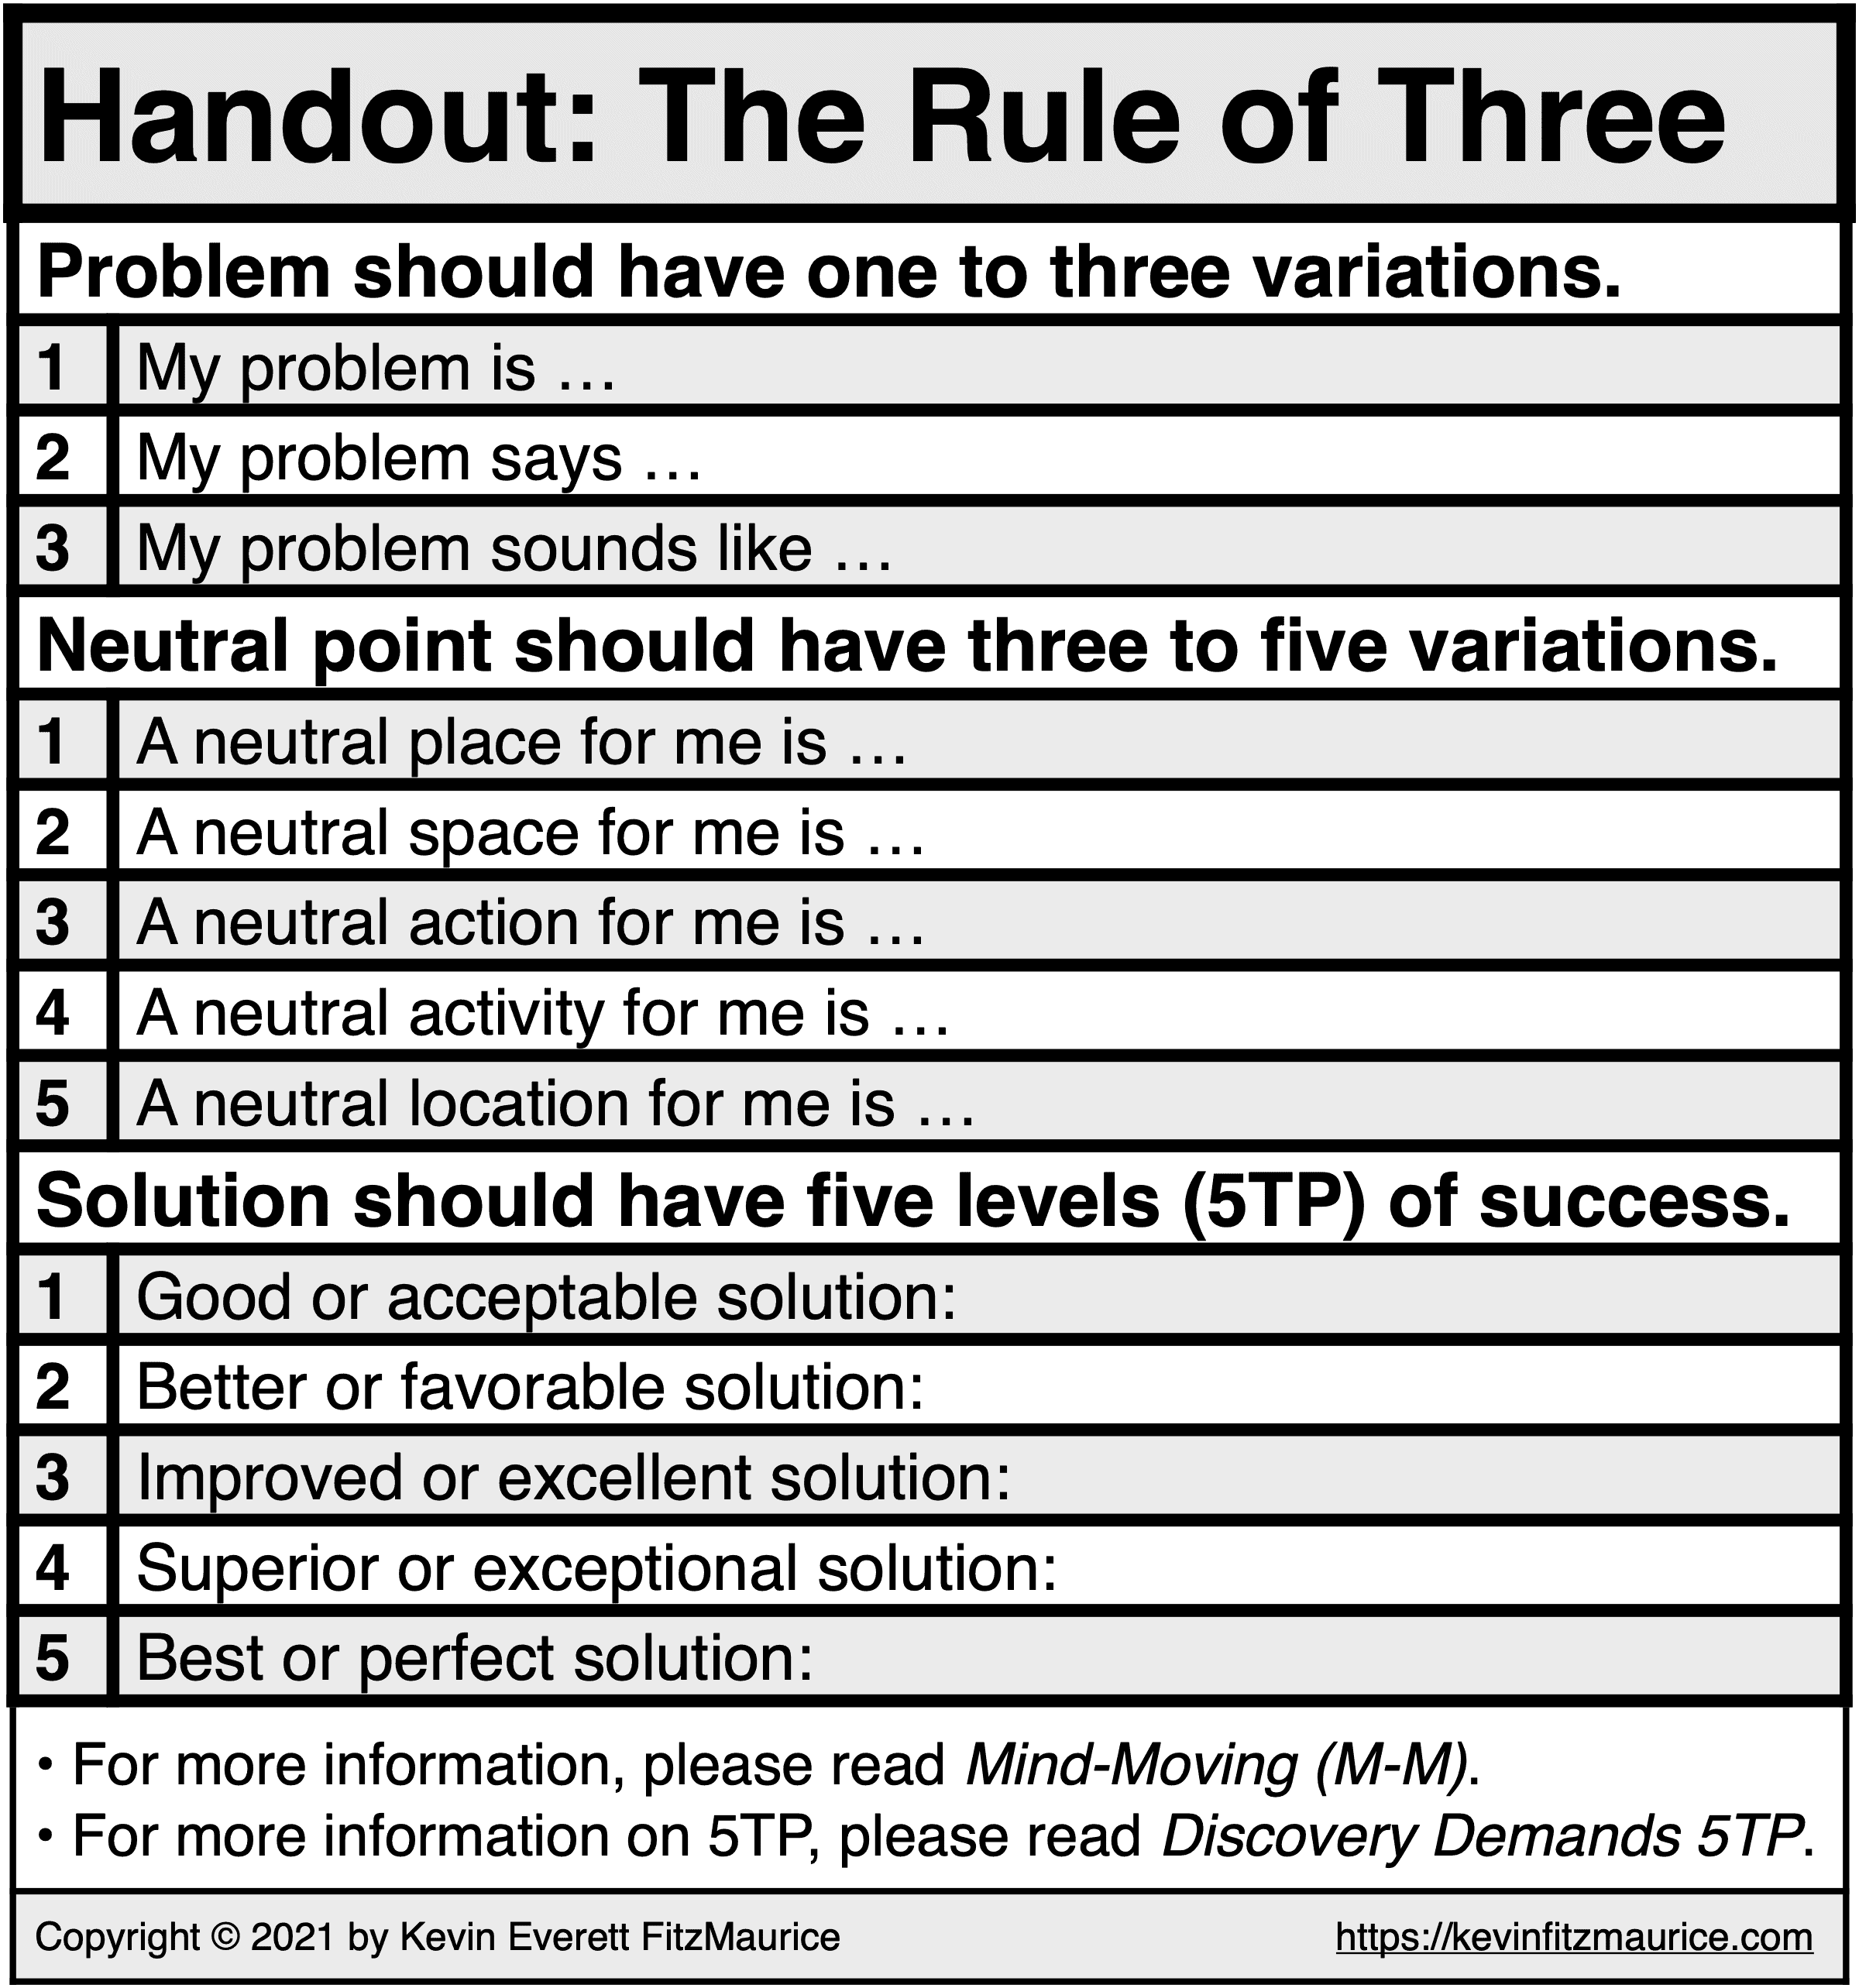 Handout for the Rule of Three